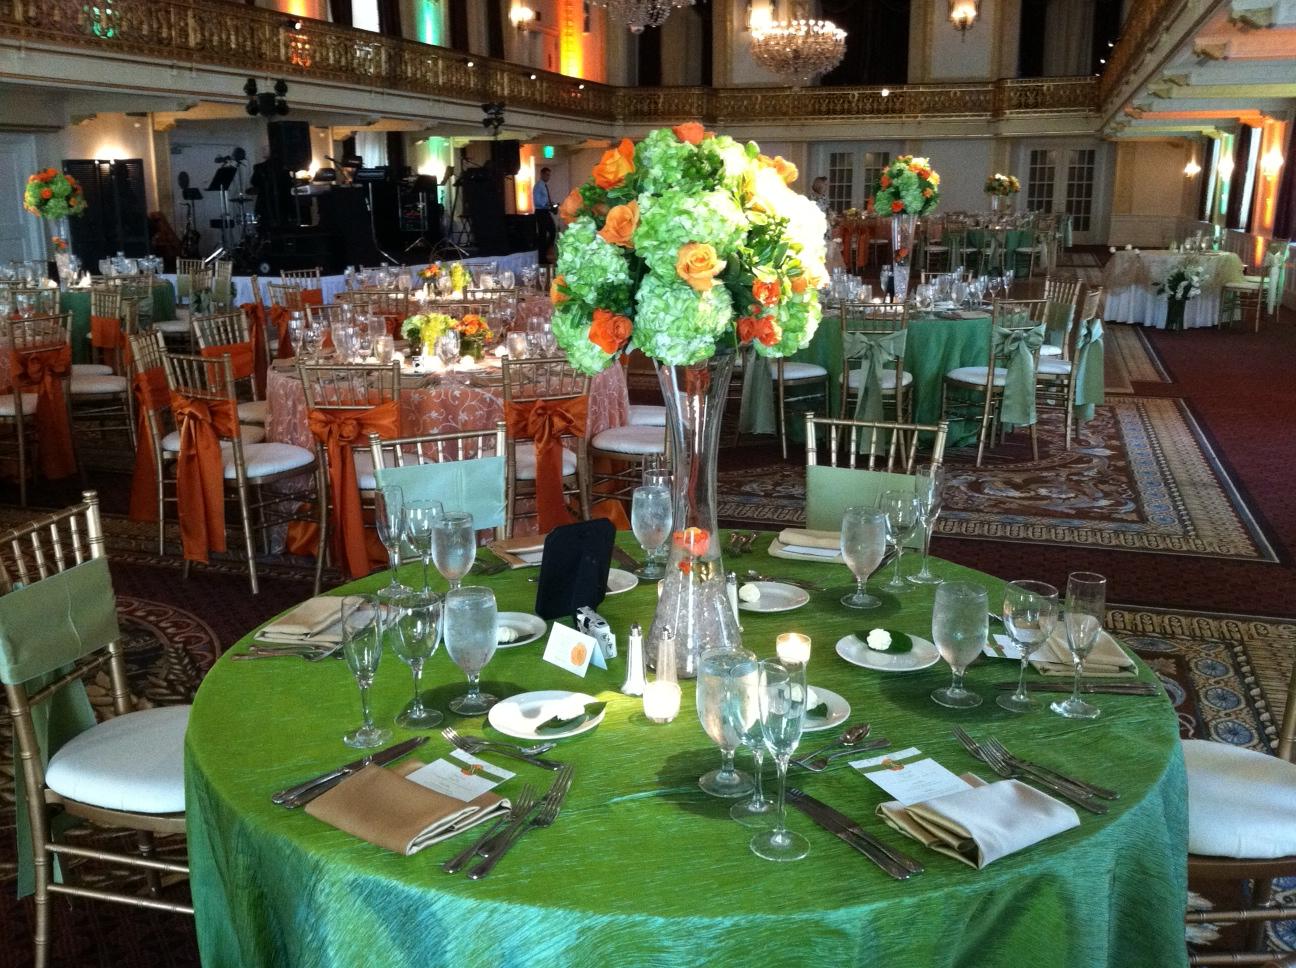 High and low centerpieces add